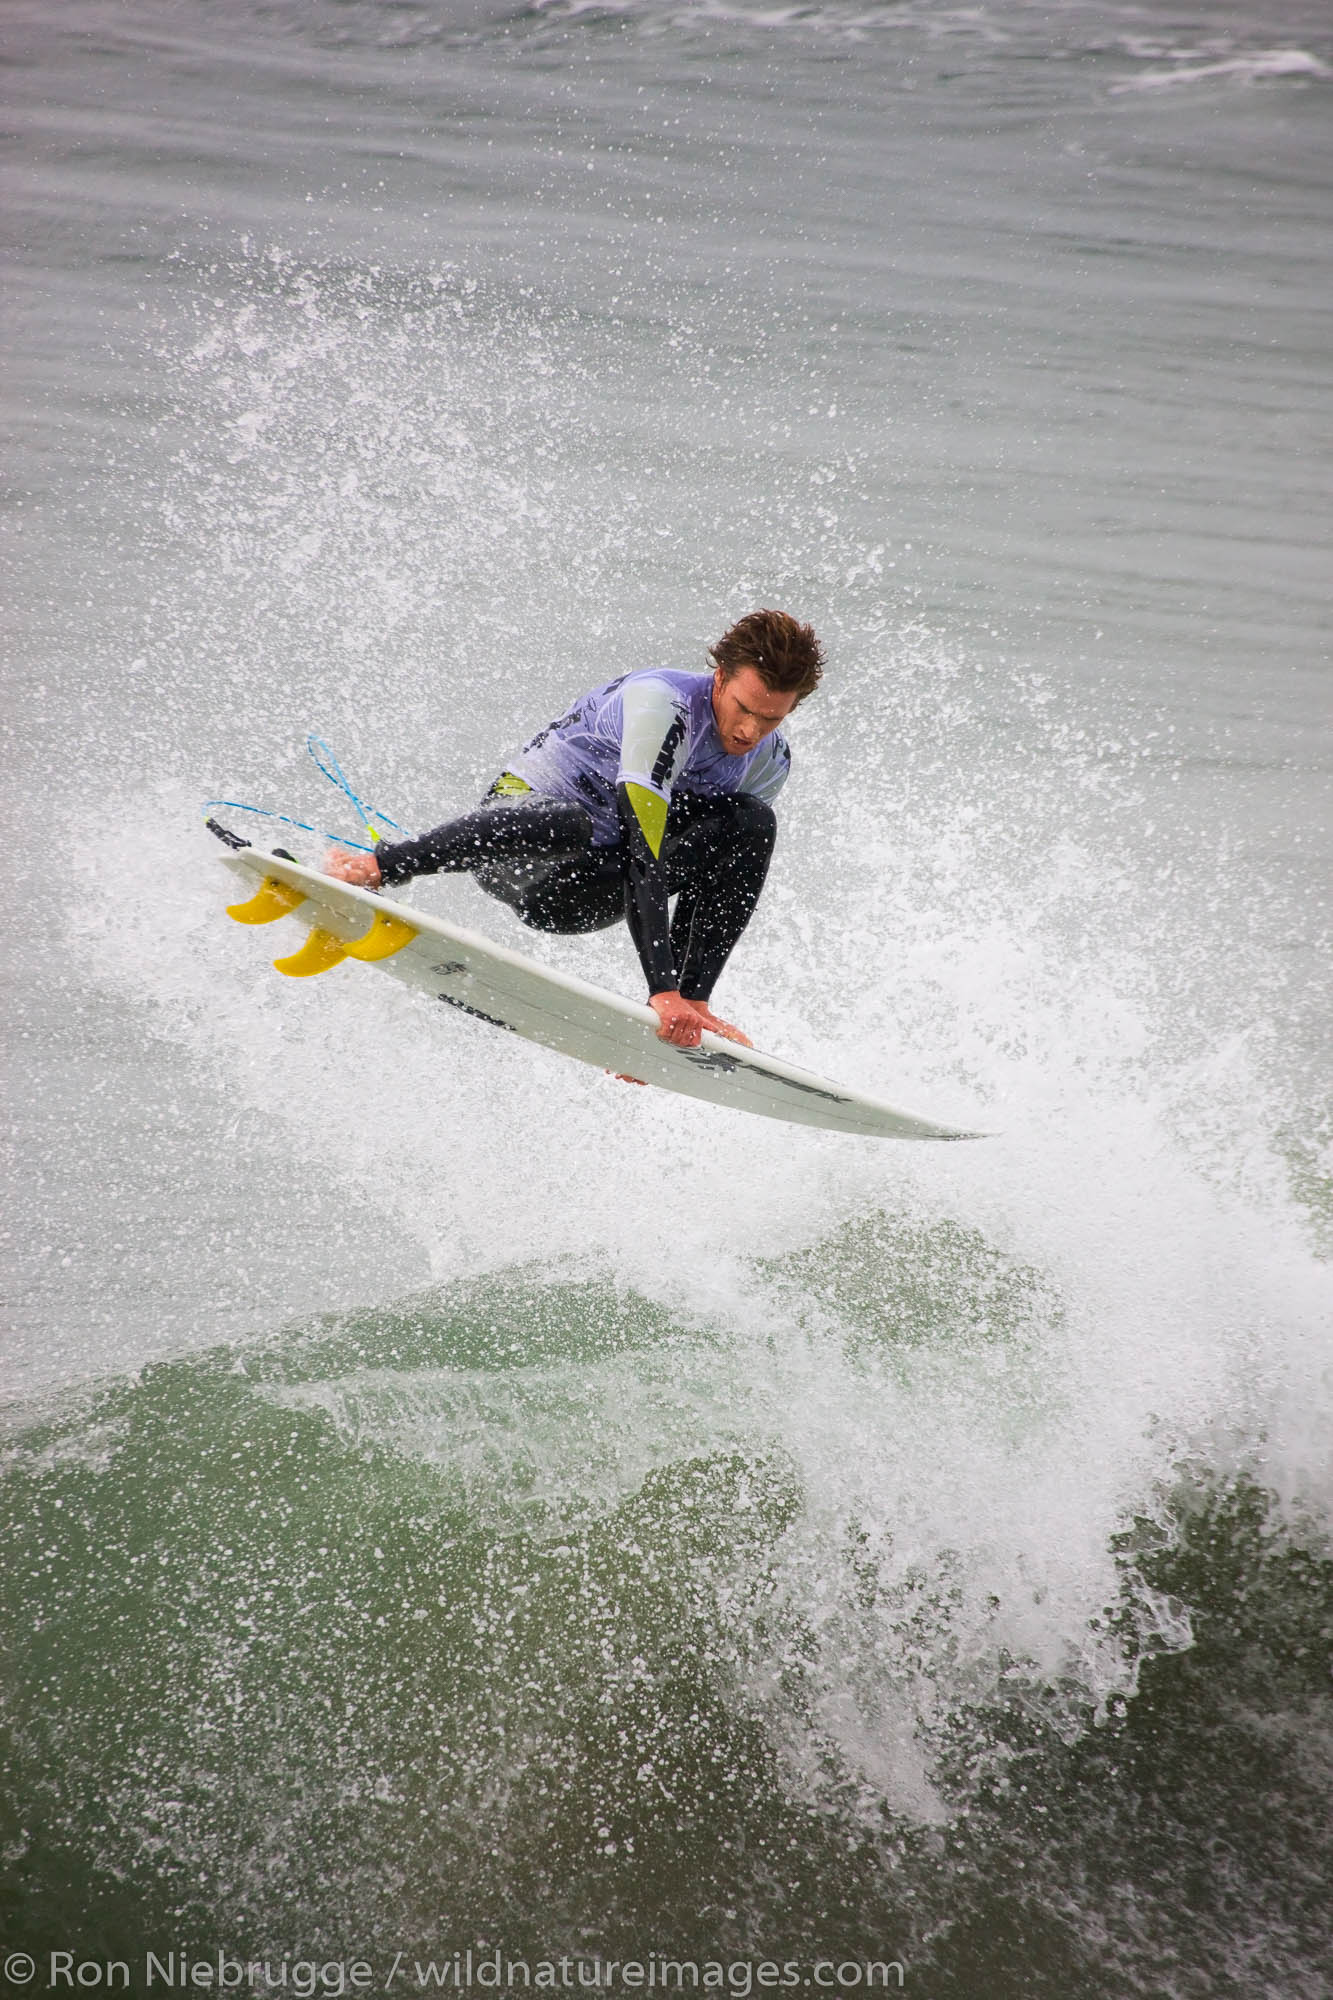 Brett Simpson competing in the Katin Pro/Am surf competition at Huntington Beach Pier, Orange County, California.